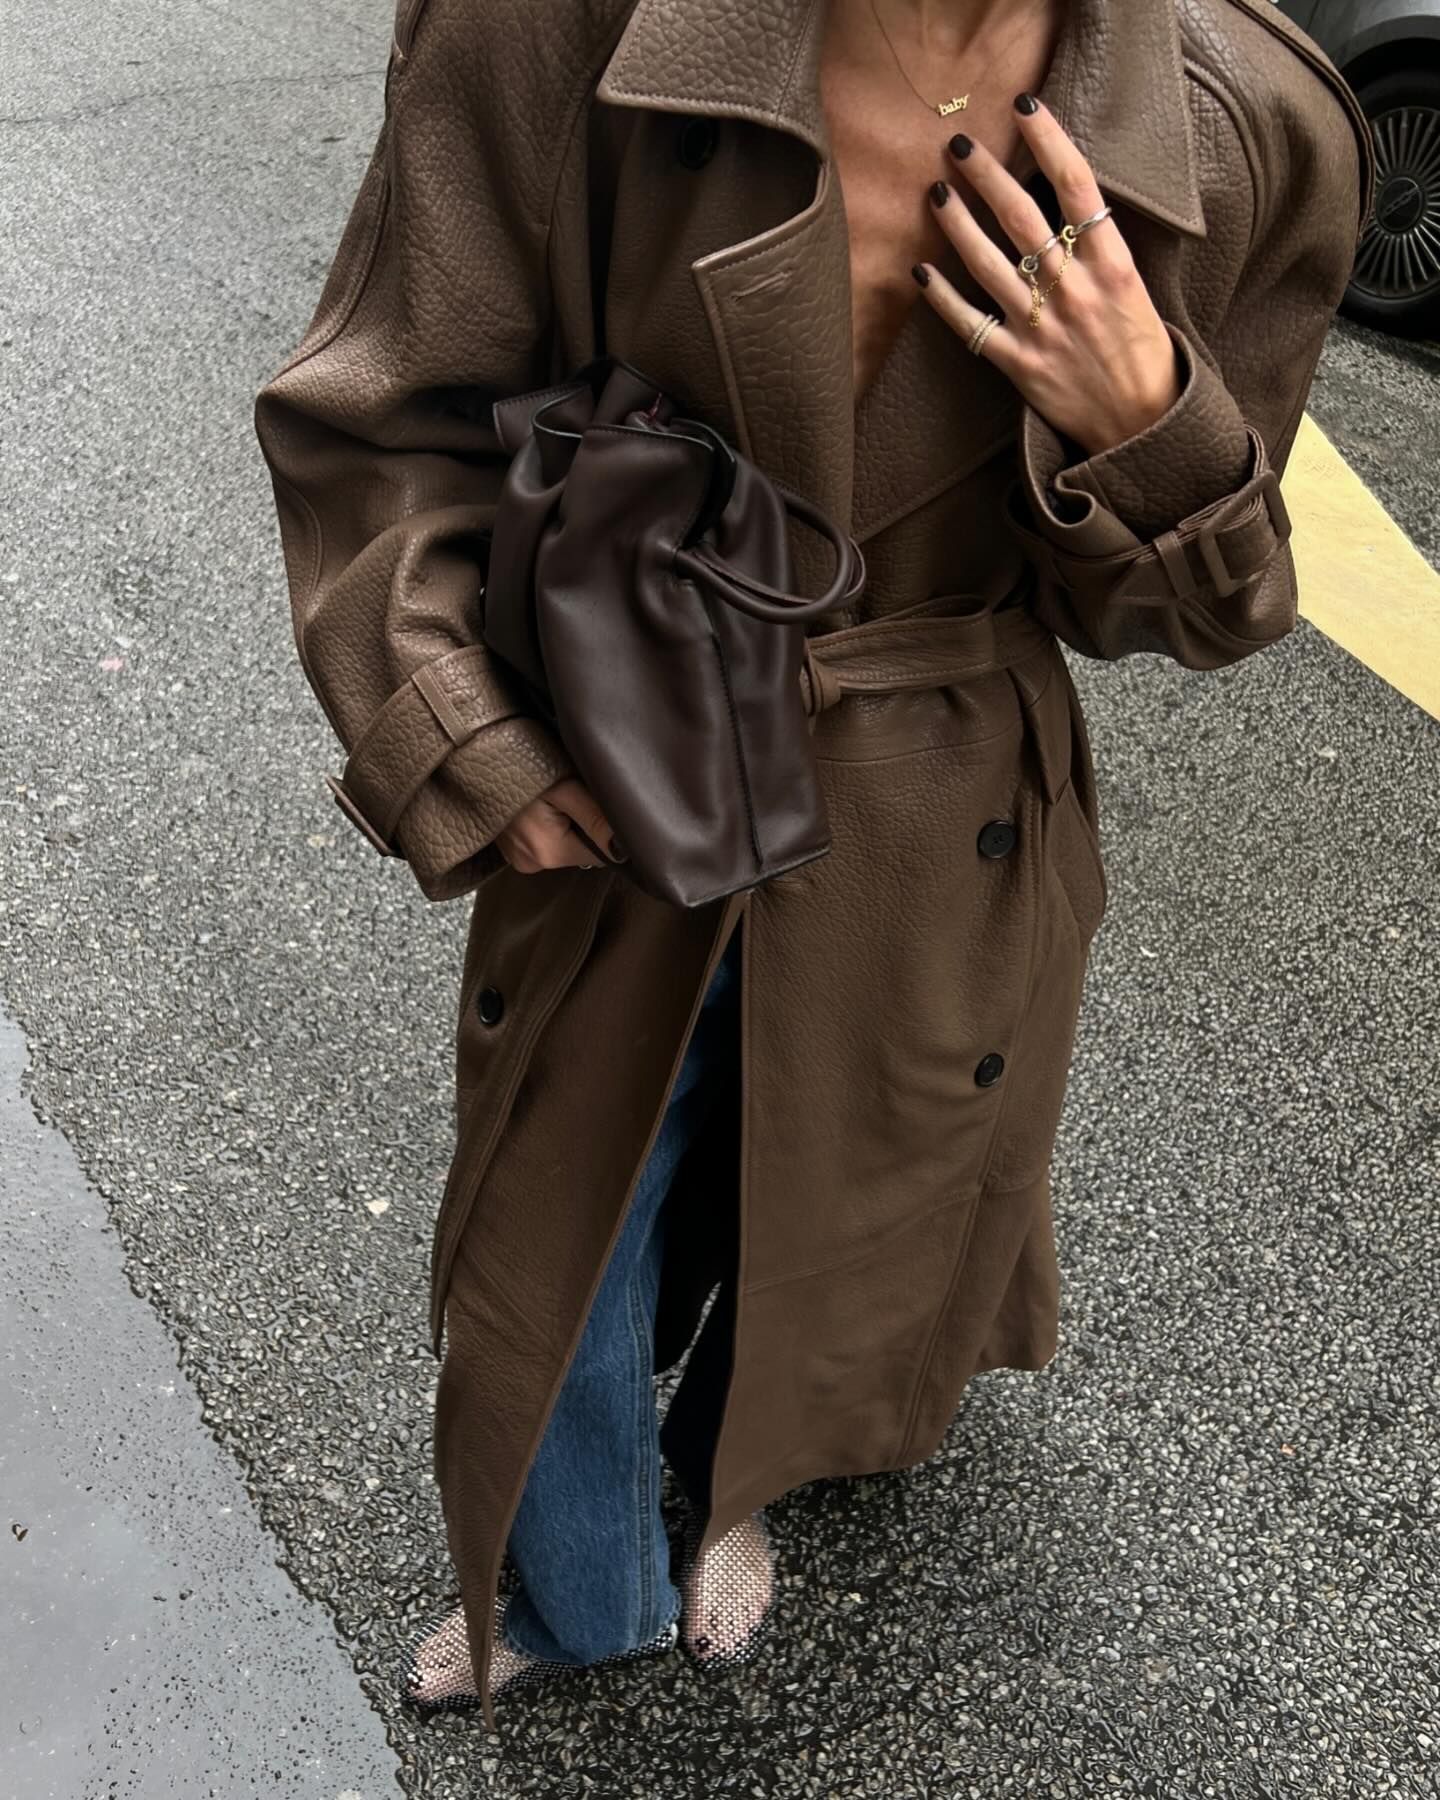 Hannah Lewis wearing a brown leather trench coat with jeans and fishnet flats